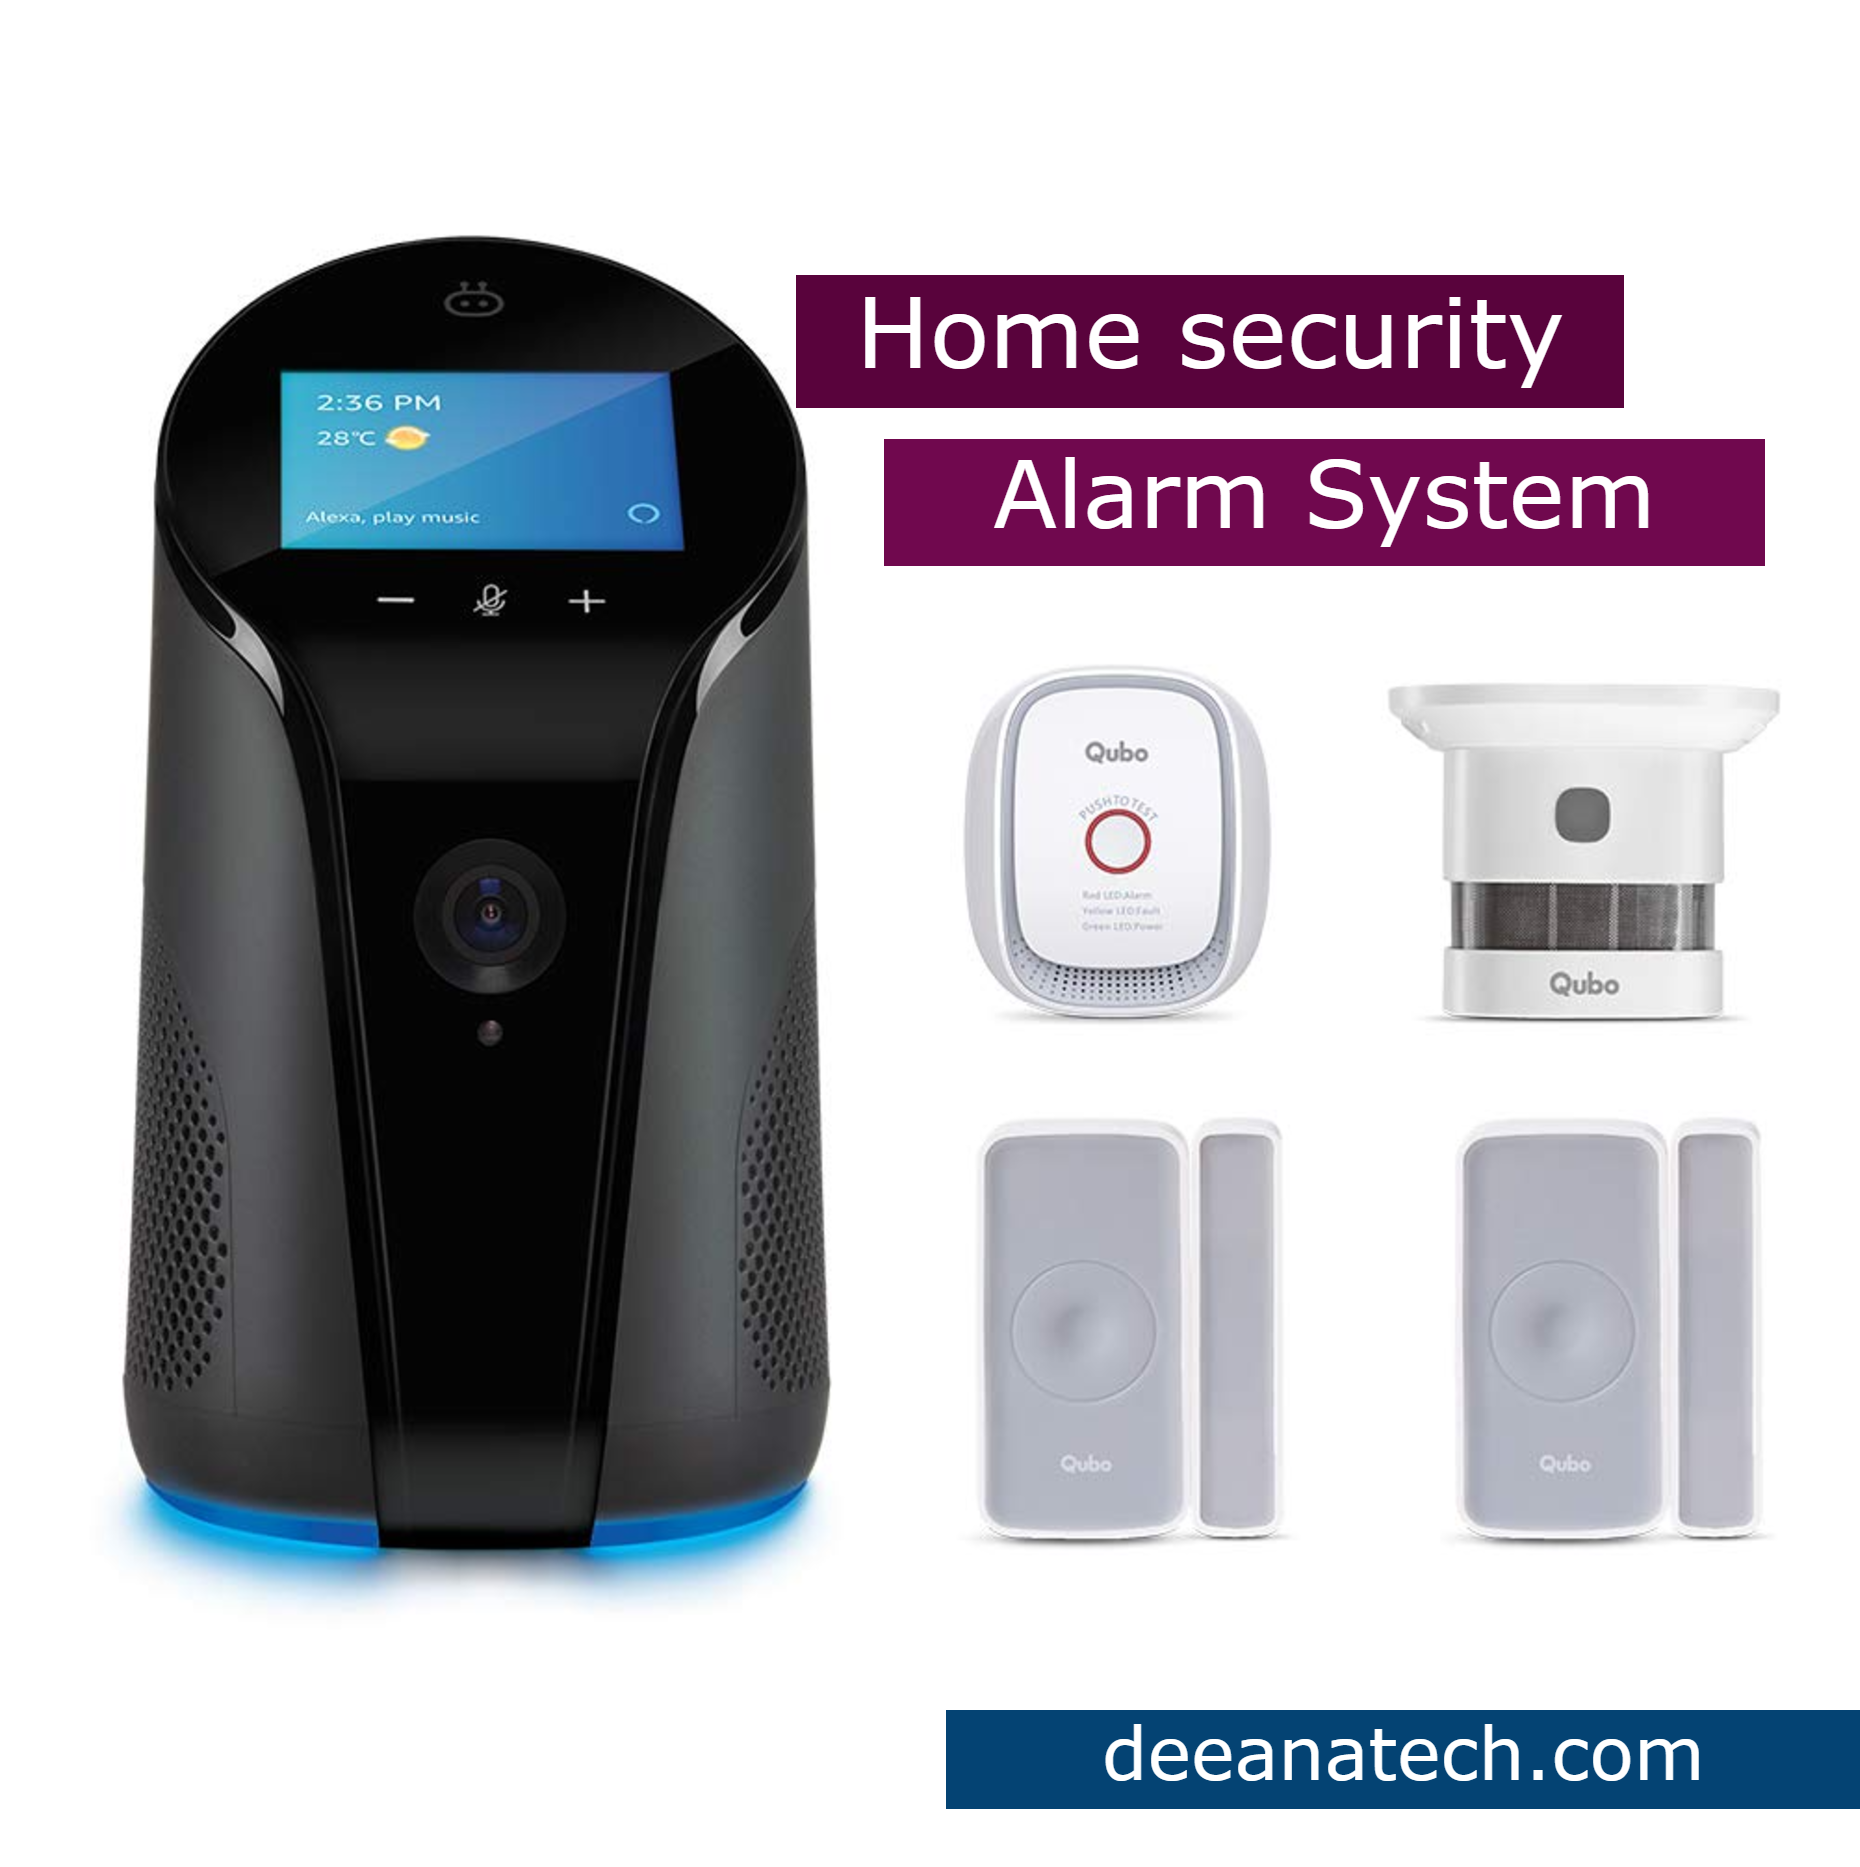 Home security systems- Know Types of Wireless Home security systems- DeeanaTech